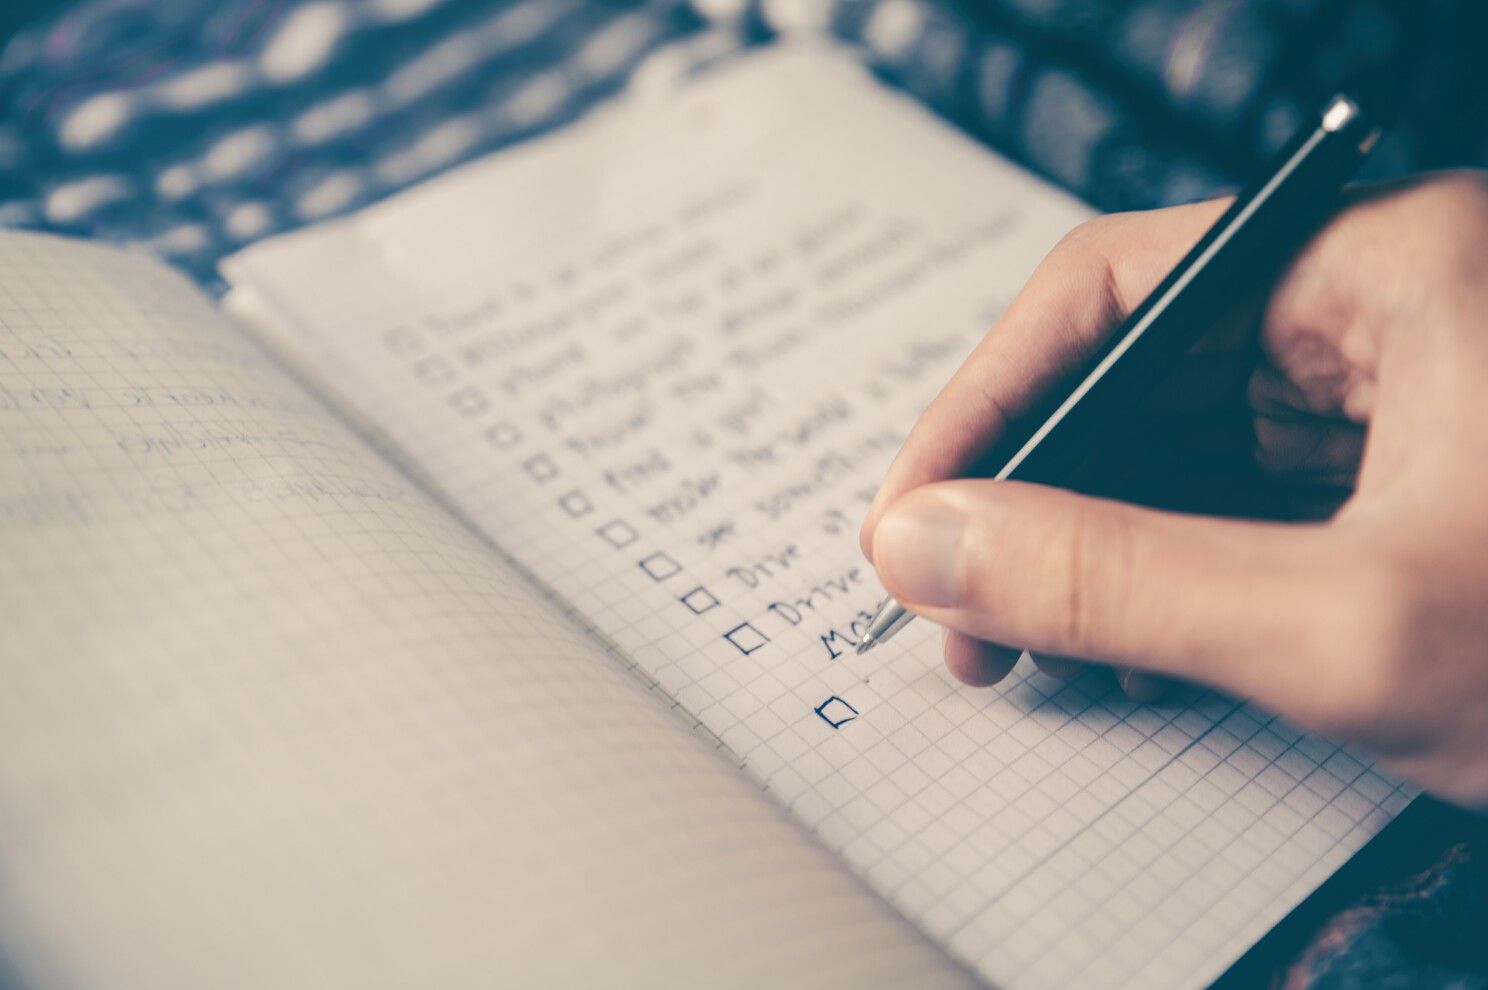 Taking notes and planning time and tasks. A to-do list.